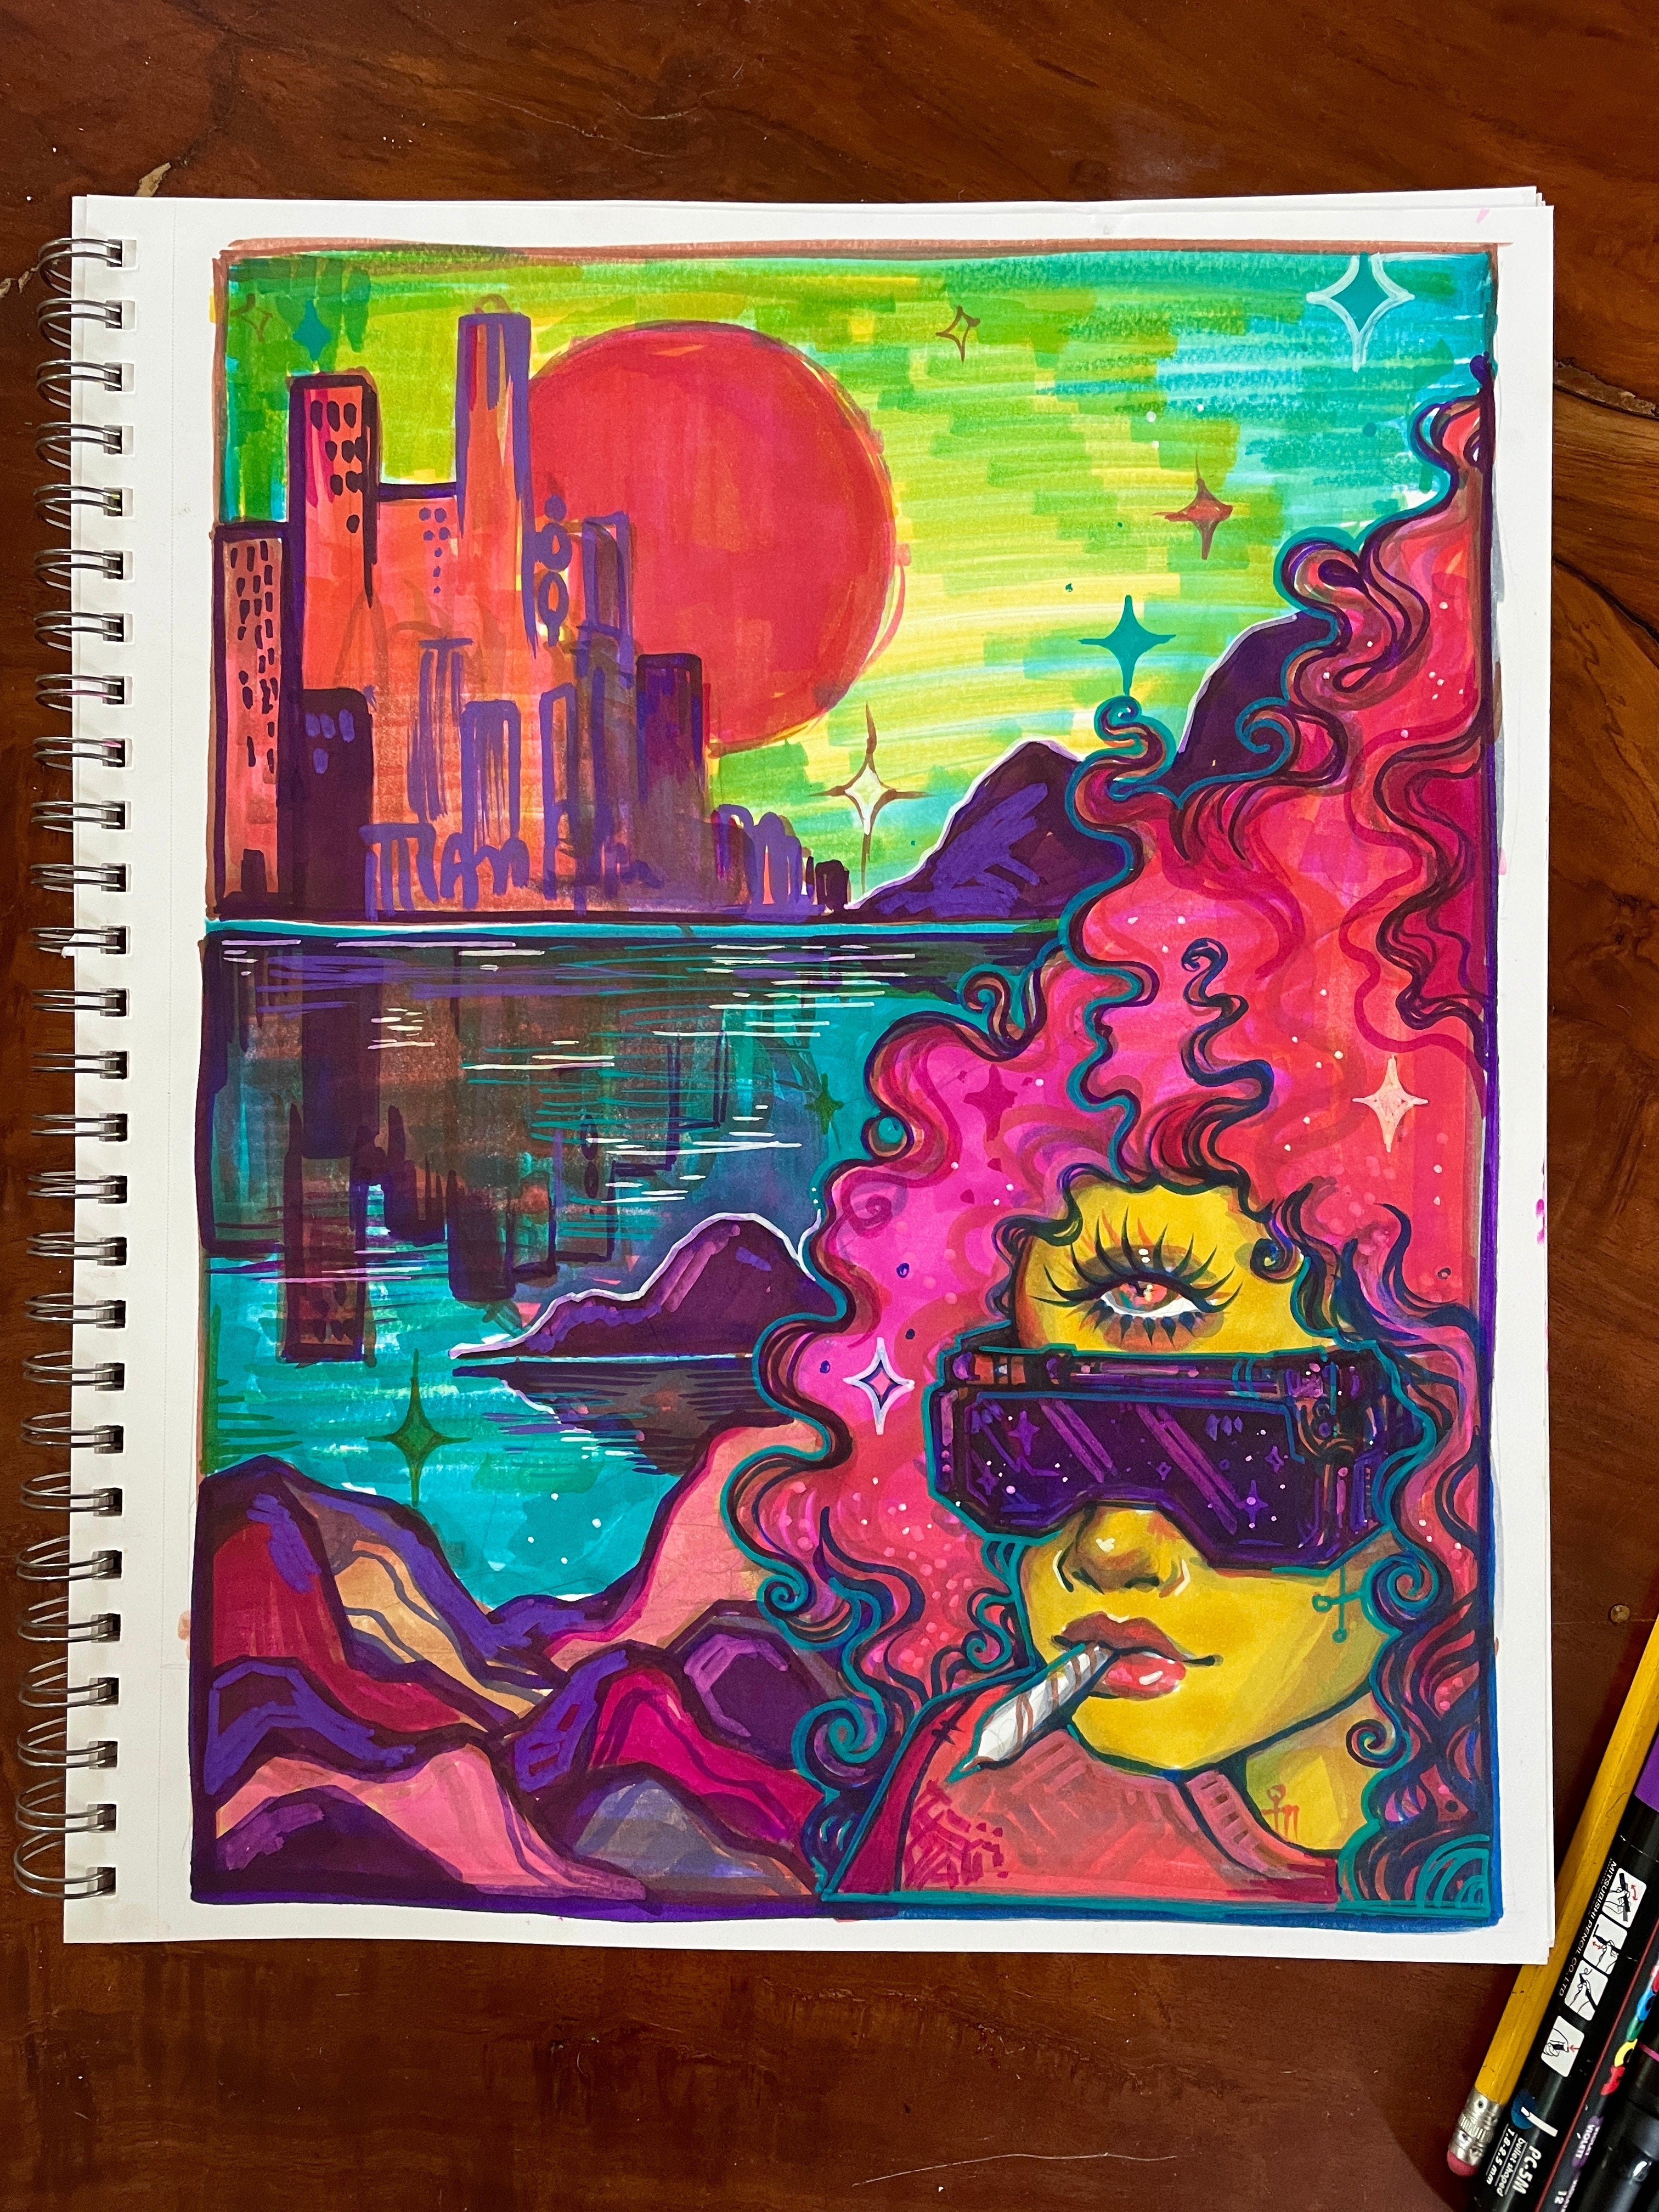 Sunrise In the City - Original Marker Drawing 9x12"